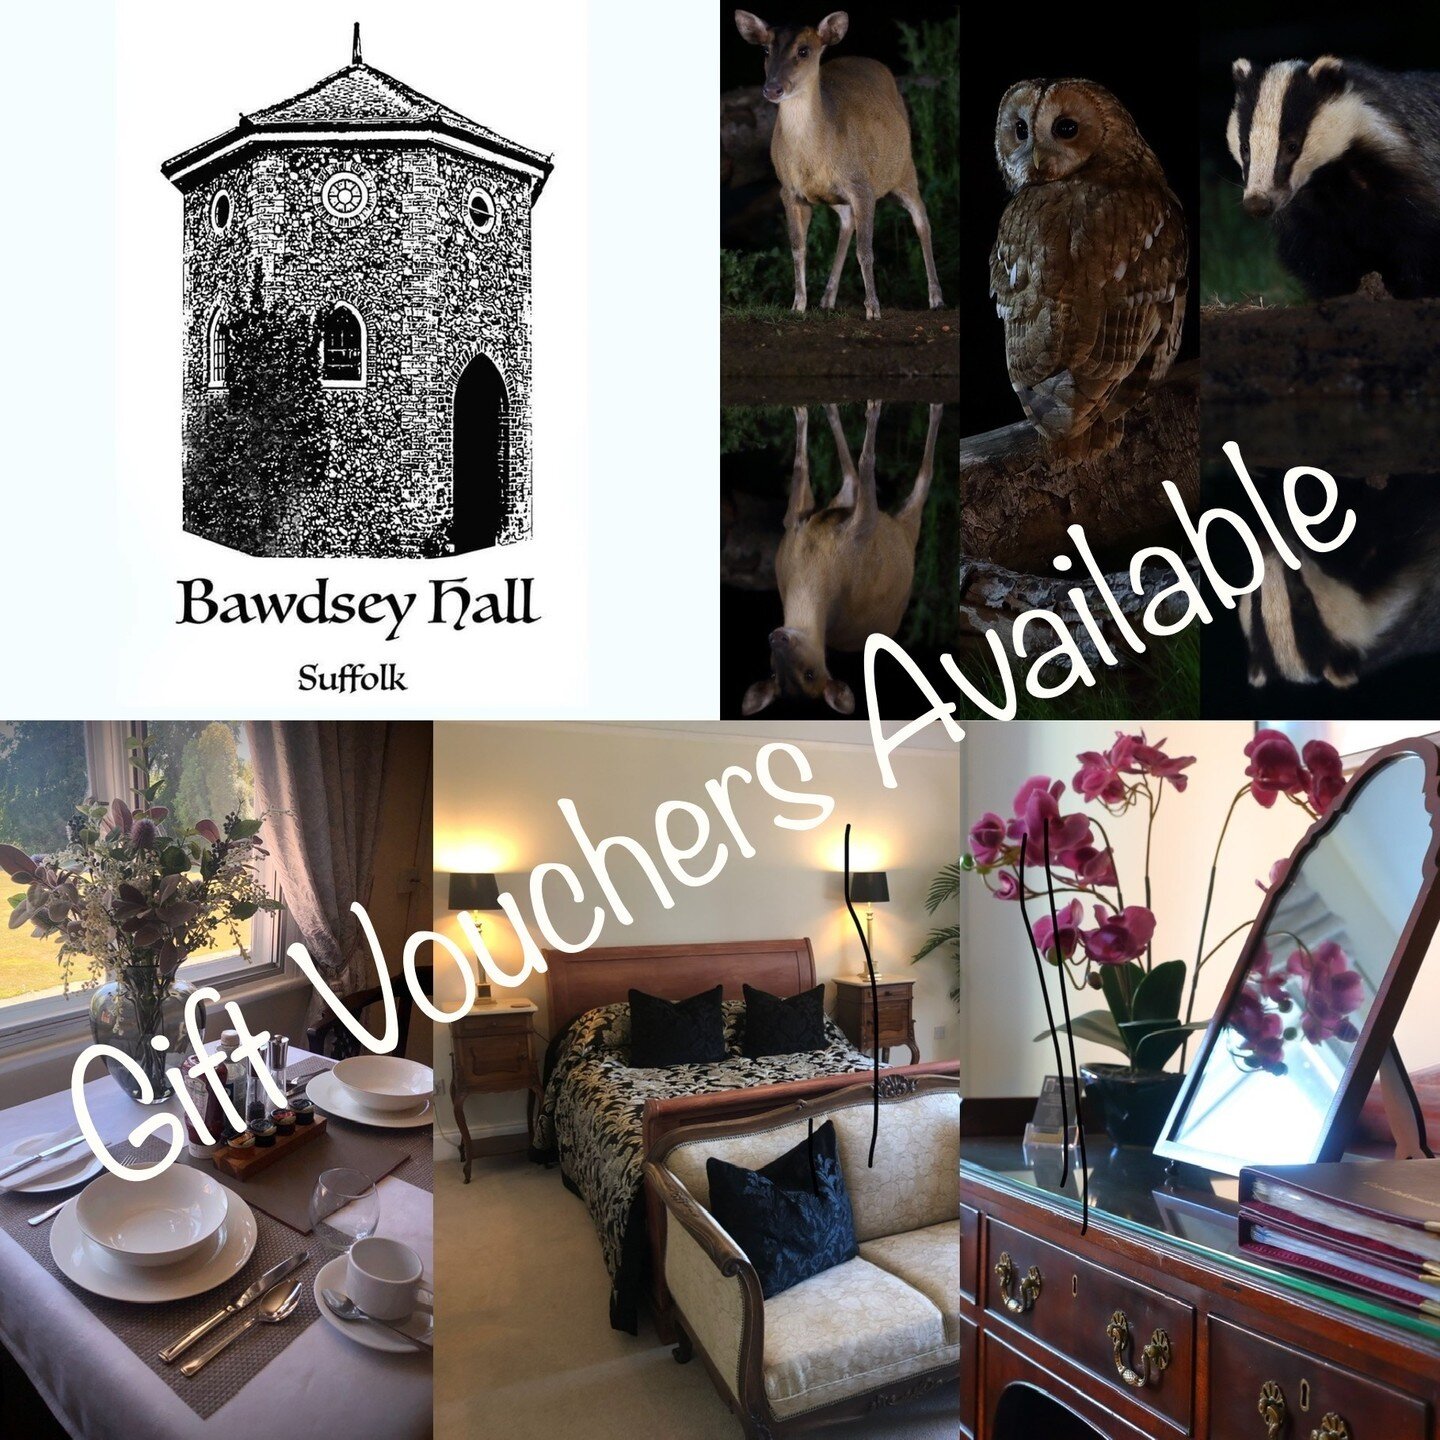 Have you got a special #birthday, #anniversary or celebration coming up for a friend or family member? Why not purchase a gift voucher for either a getaway at Bawdsey Hall or a Photography Experience&hellip;.

Gift vouchers are available directly fro